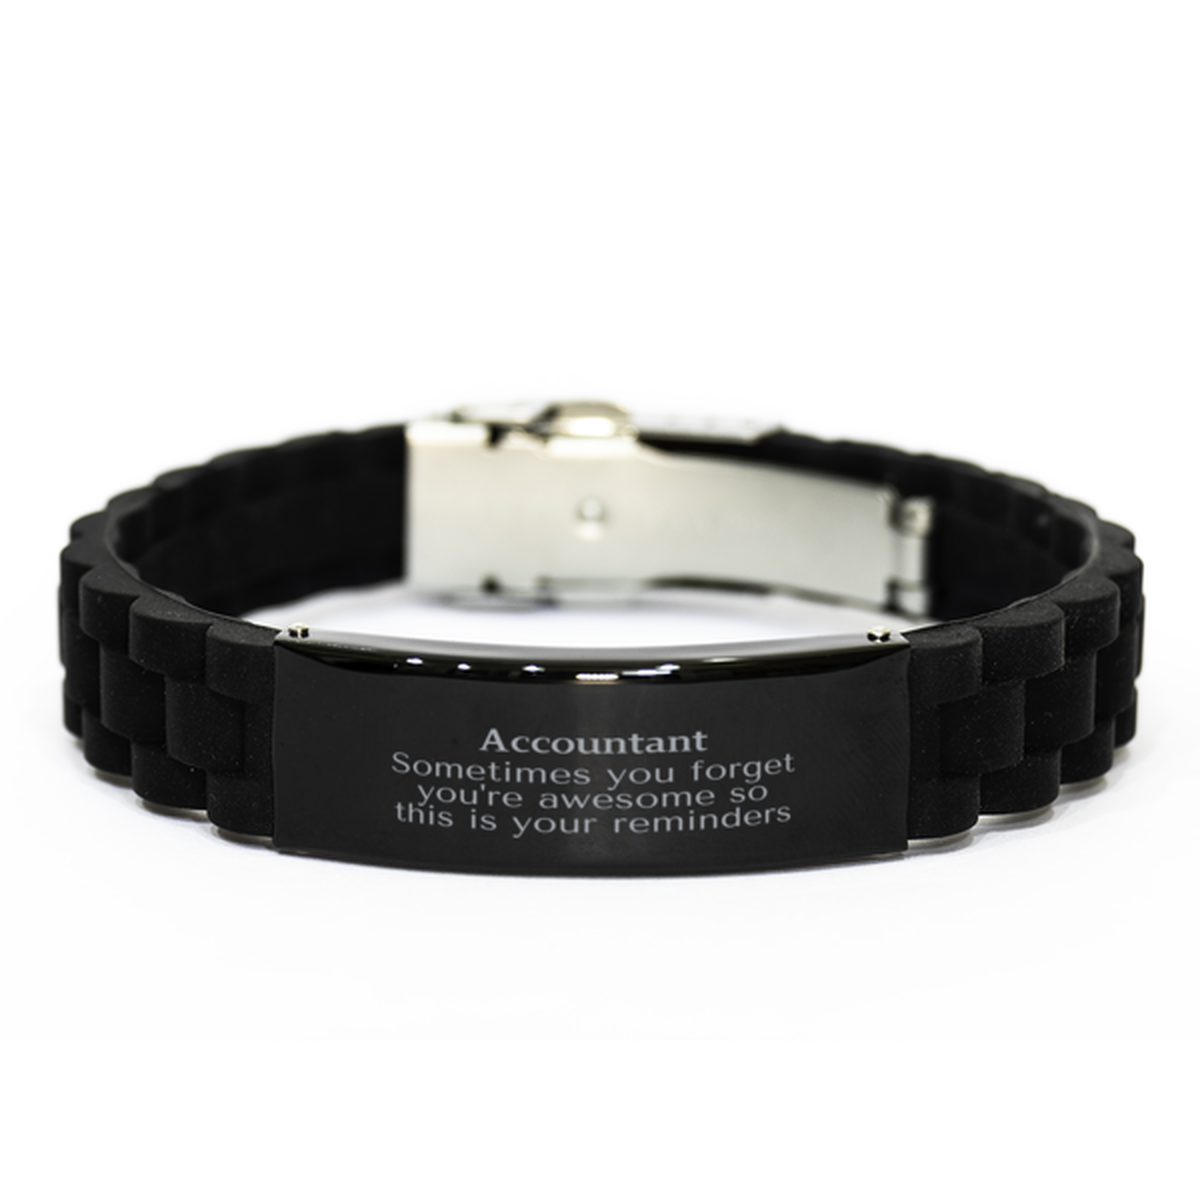 Sentimental Accountant Black Glidelock Clasp Bracelet, Accountant Sometimes you forget you're awesome so this is your reminders, Graduation Christmas Birthday Gifts for Accountant, Men, Women, Coworkers